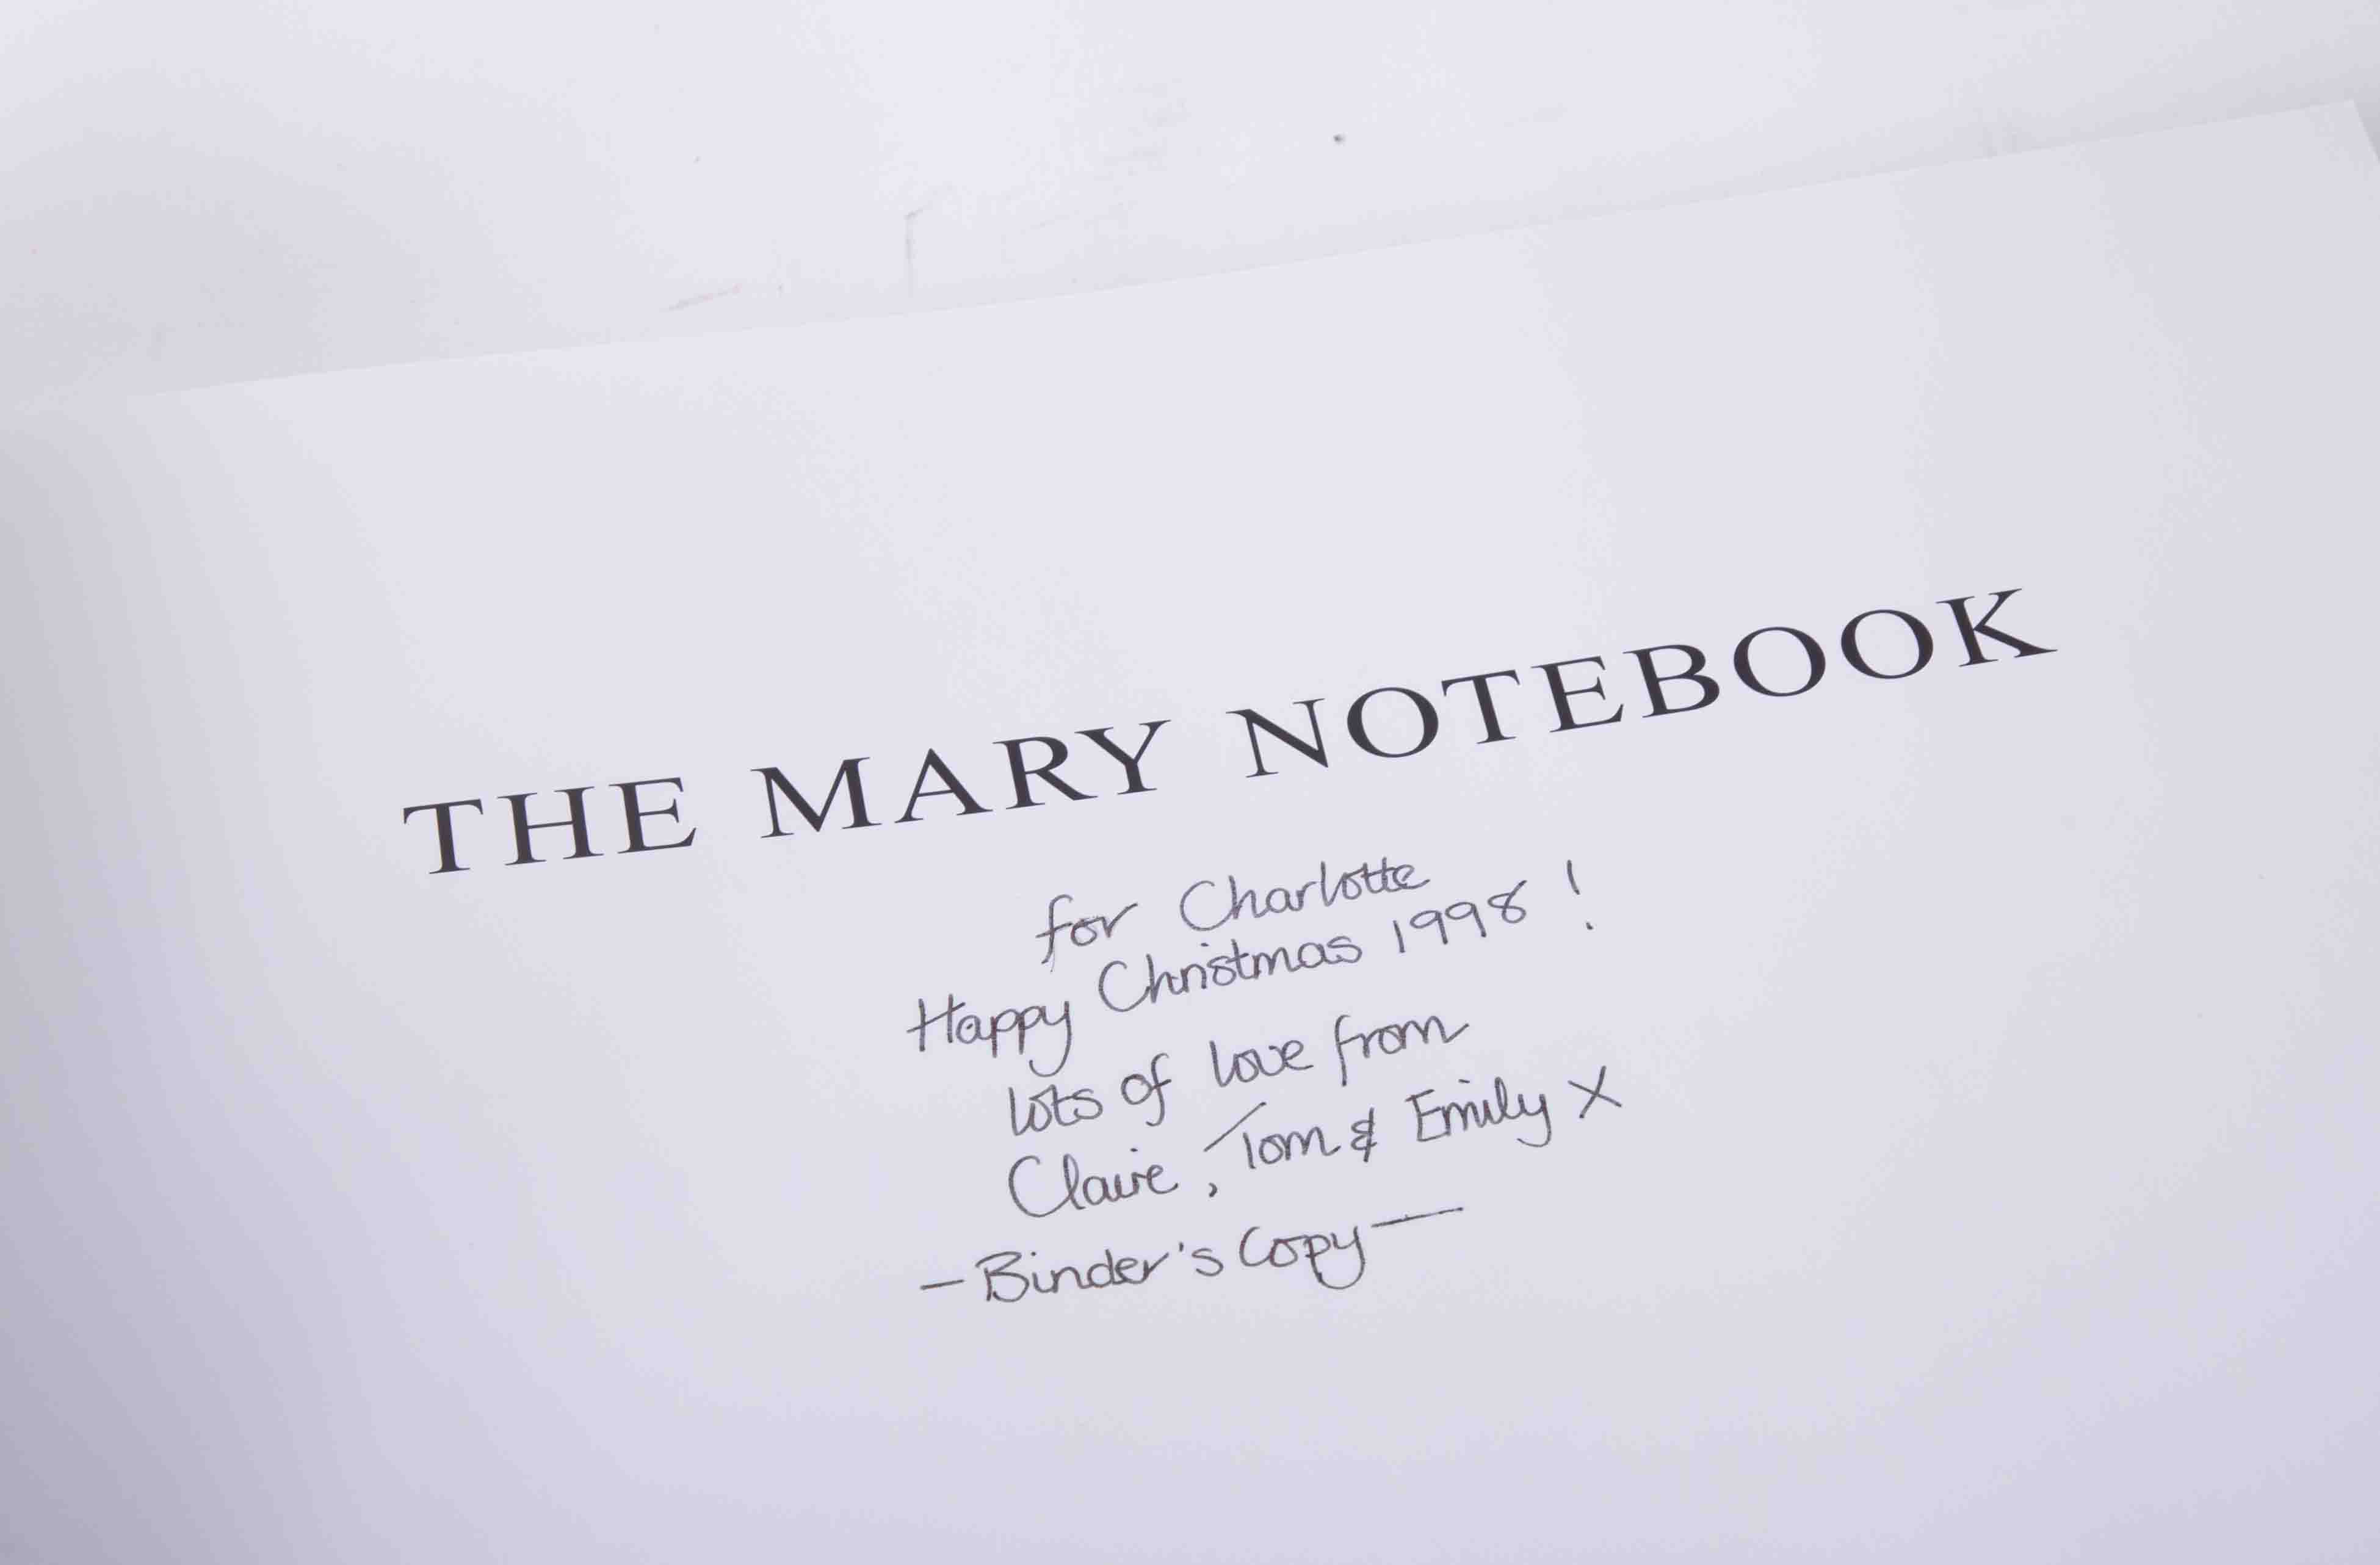 Robert Lenkiewicz, book 'The Mary Notebook', published by White Lane Press, personalised inscription - Image 2 of 2